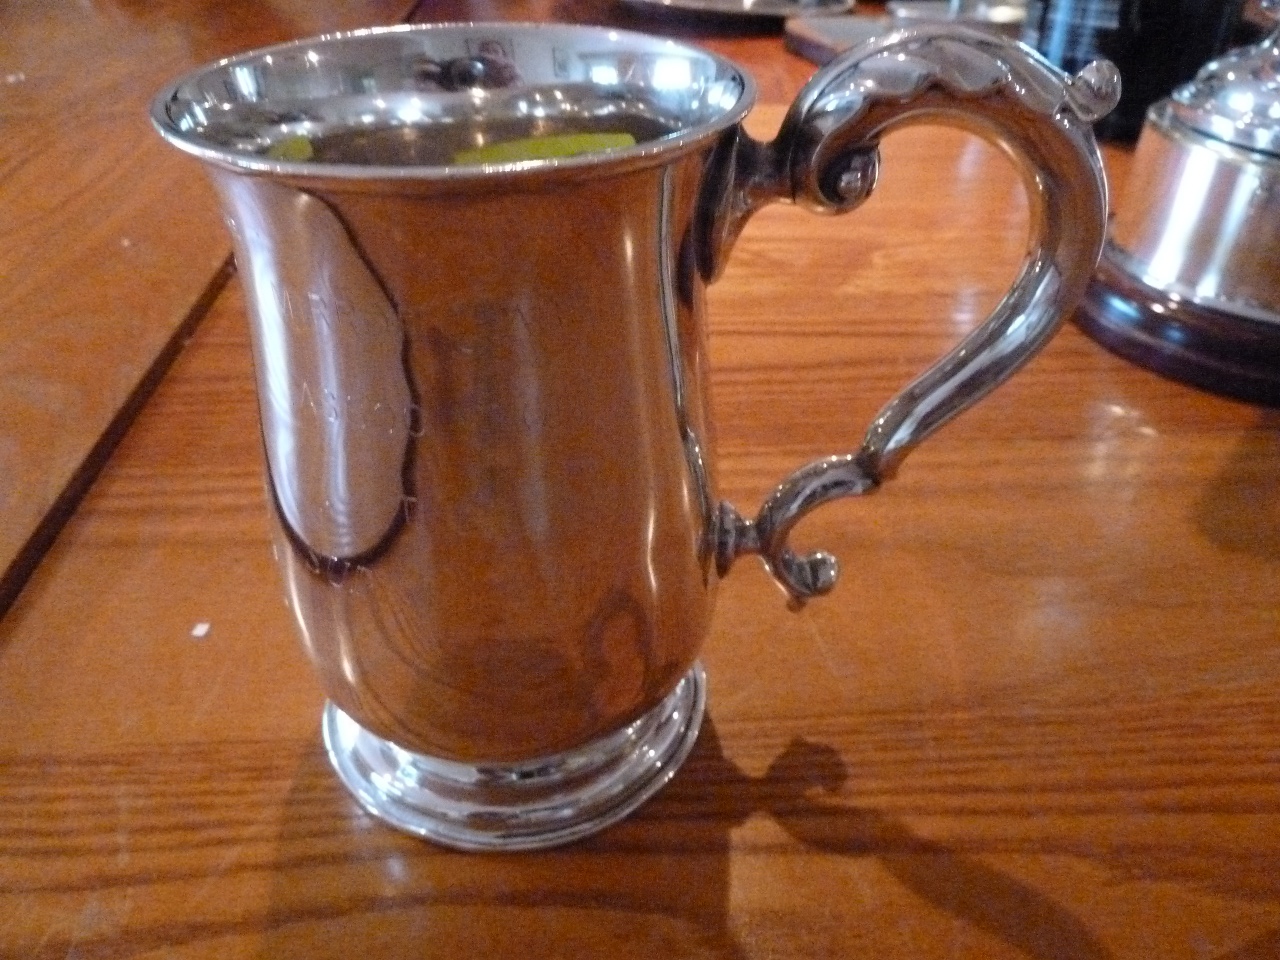 A silver cup with one handle